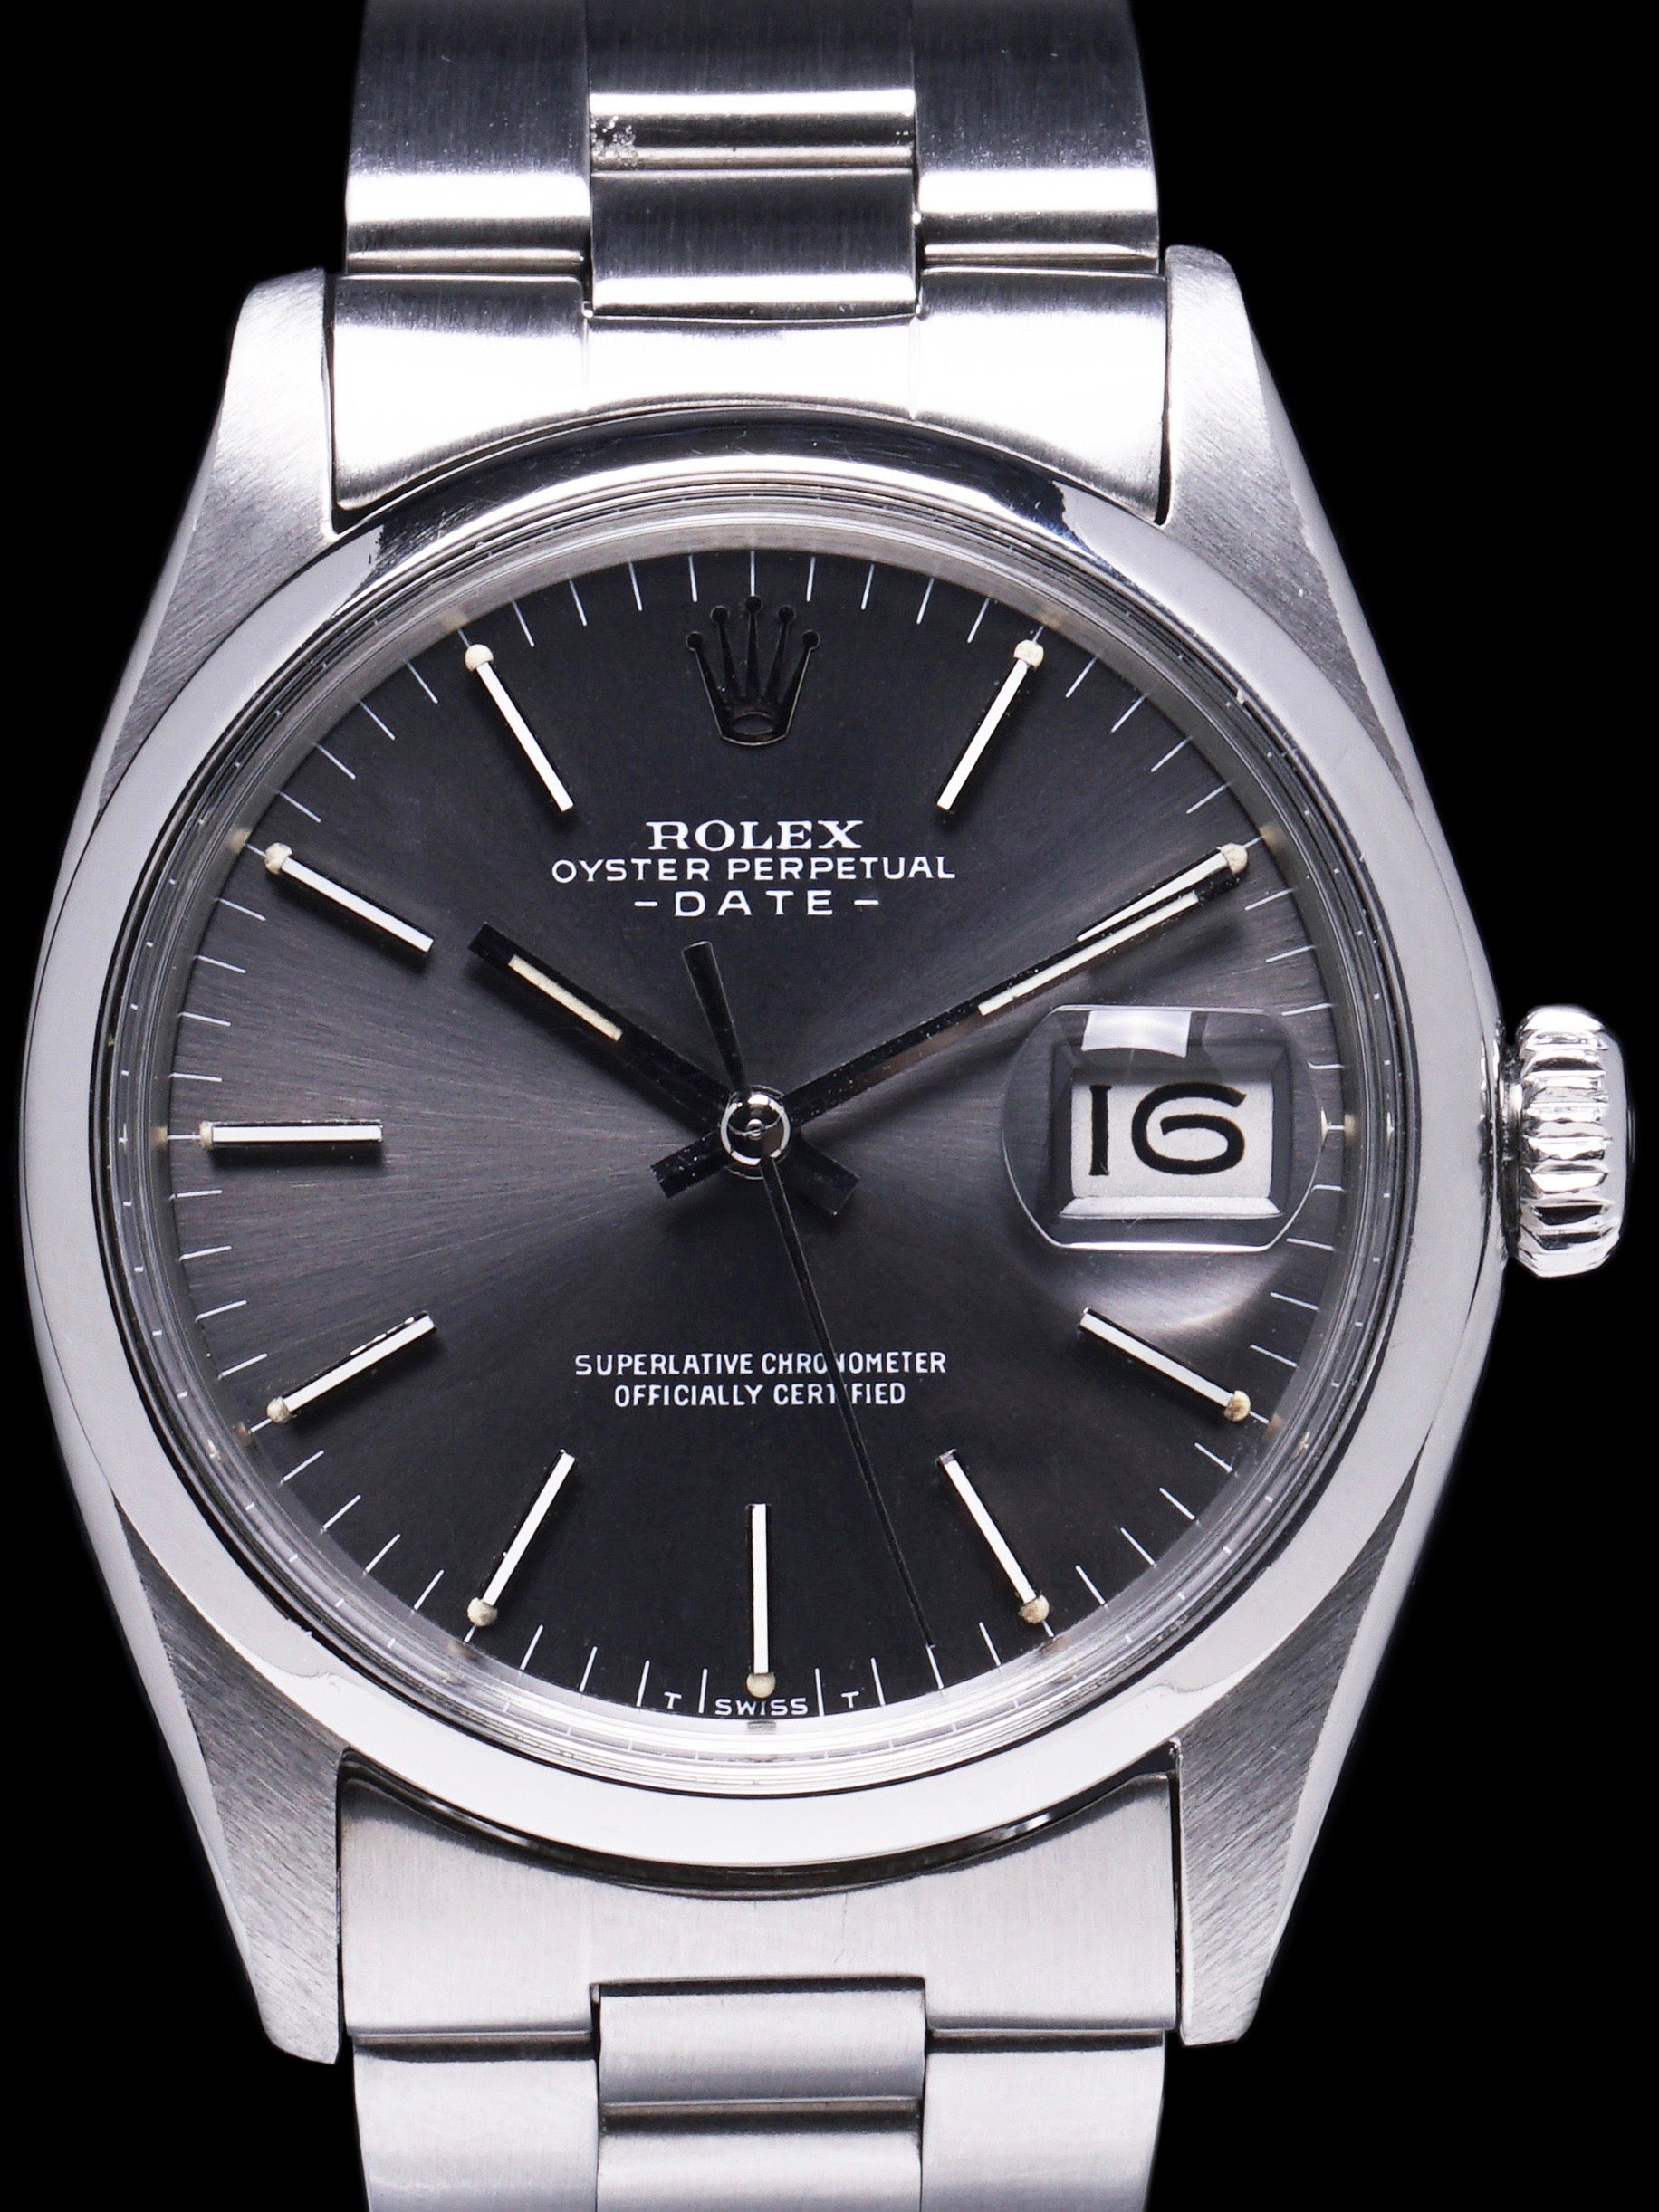 1970 Rolex Oyster Perpetual Date (Ref. 1500) "Grey Dial"